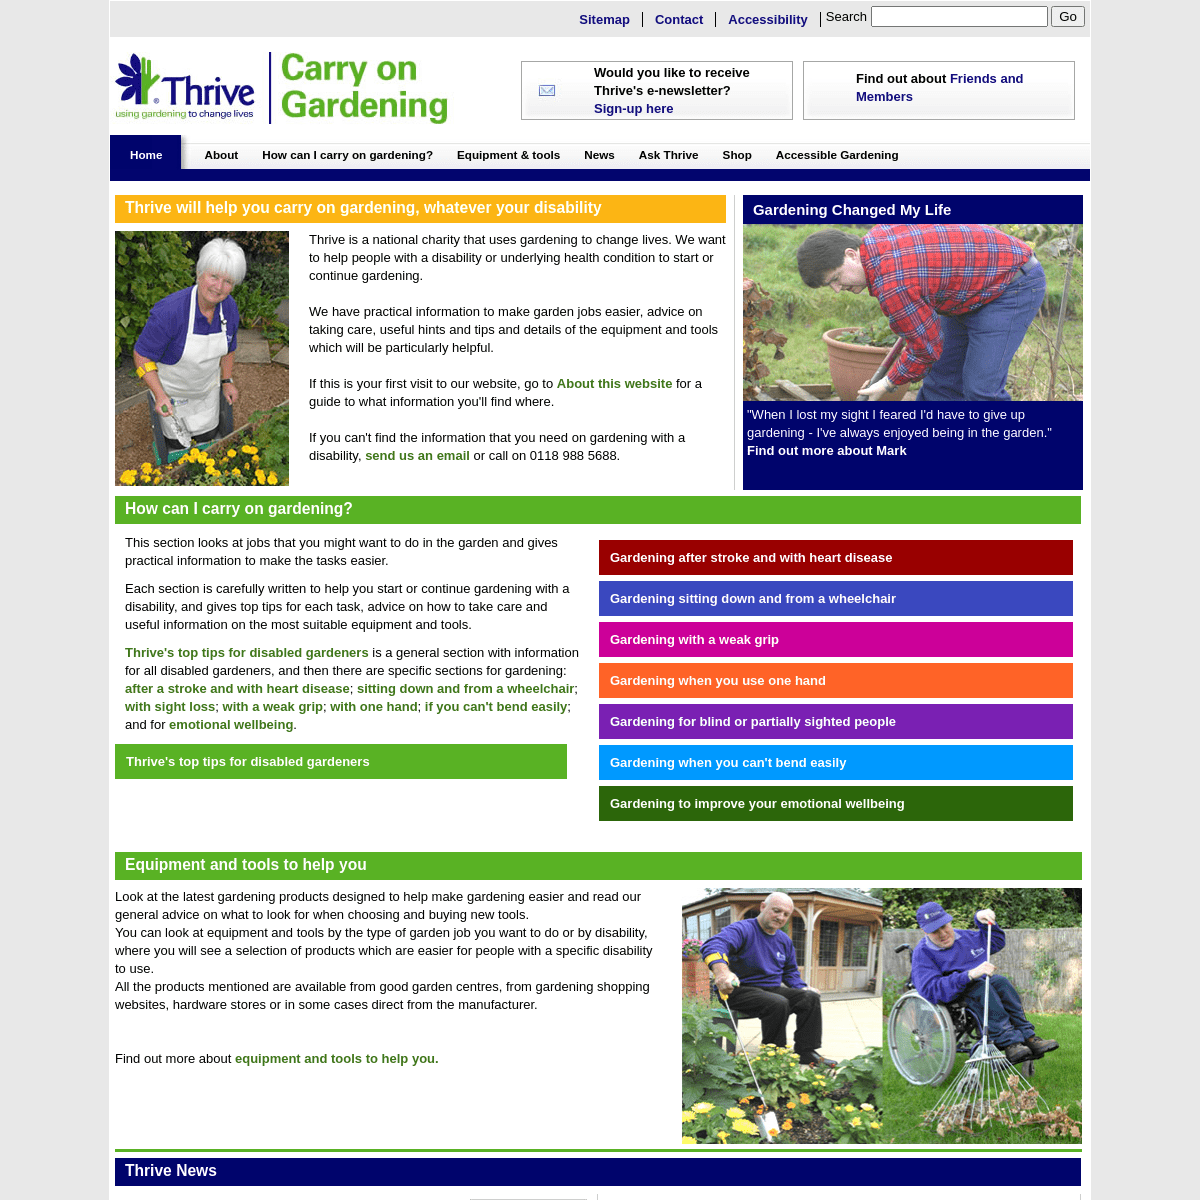 Carry on Gardening, Thrive`s top tips and tools for easier gardening and gardening with a disability